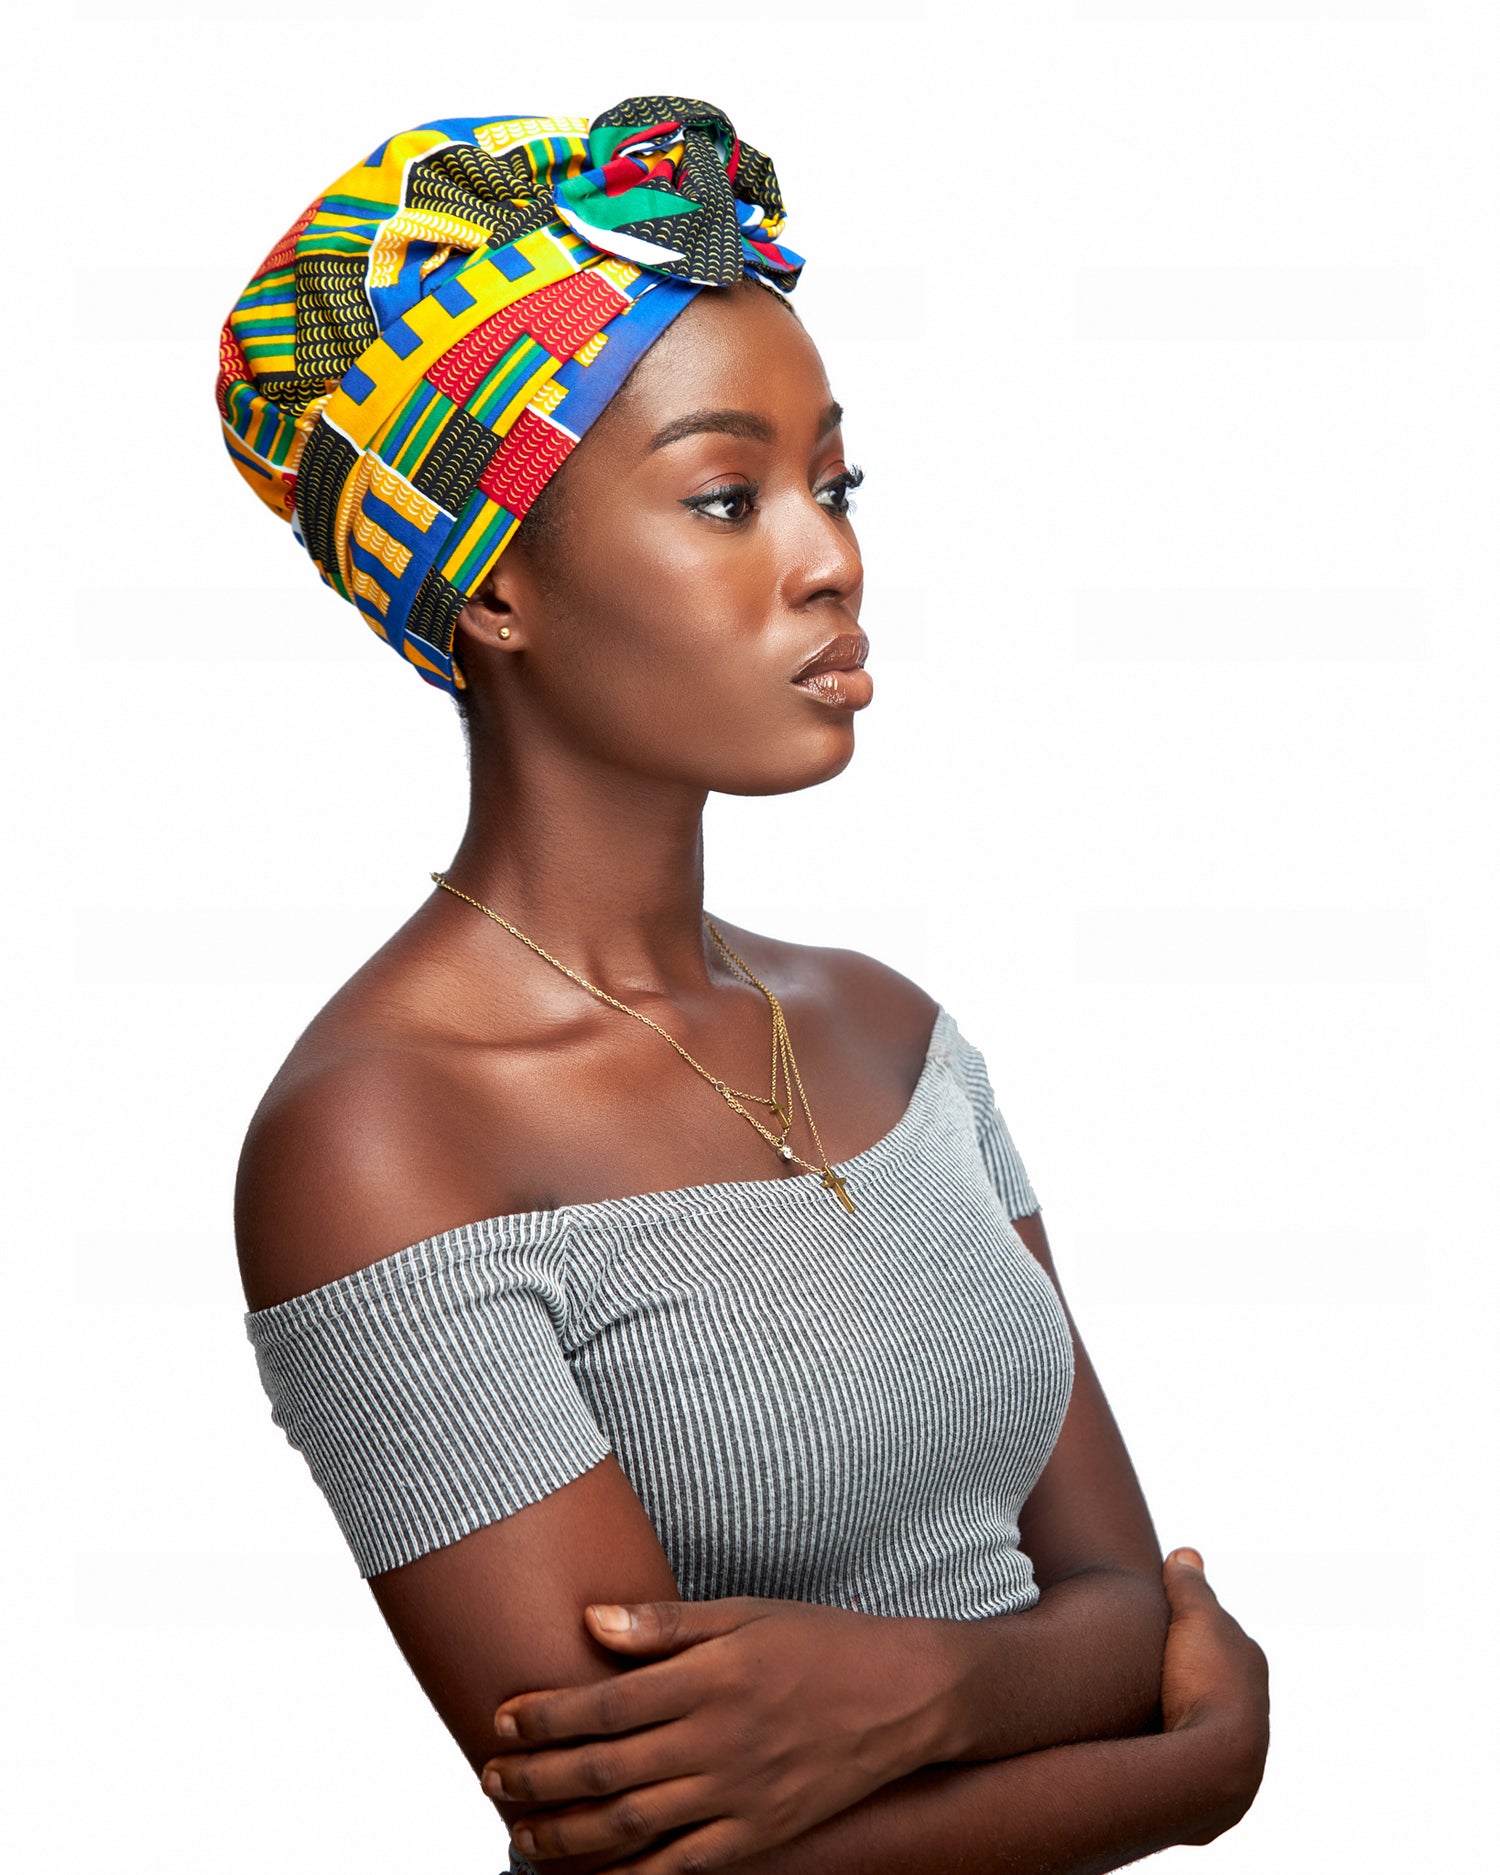 Ghanaian Kente Wax Print Made of Yellow, Red, Green, Black,Blue Blend of Beautiful Colours And Pattern With Adinkira Symbols, Hand Made Elastic Silklined Bonnet With Band